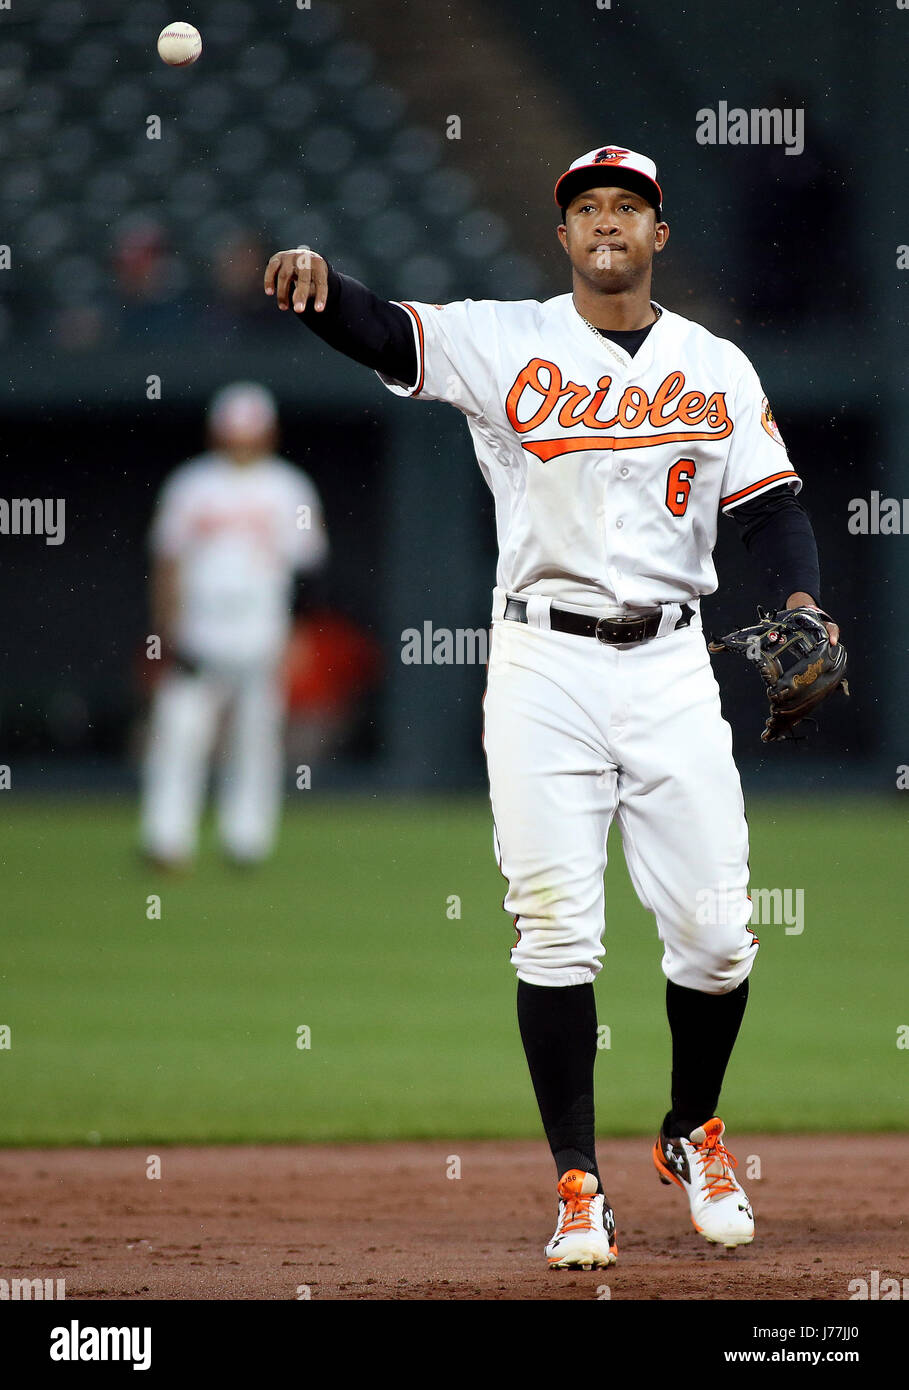 Baltimore, Maryland, USA. 23rd May, 2017. Baltimore Orioles second baseman Jonathan Schoop (6) in action during a match between the Baltimore Orioles and the Minnesota Twins at Camden Yards in Baltimore, Maryland. Daniel Kucin Jr./Cal Sport Media/Alamy Live News Stock Photo